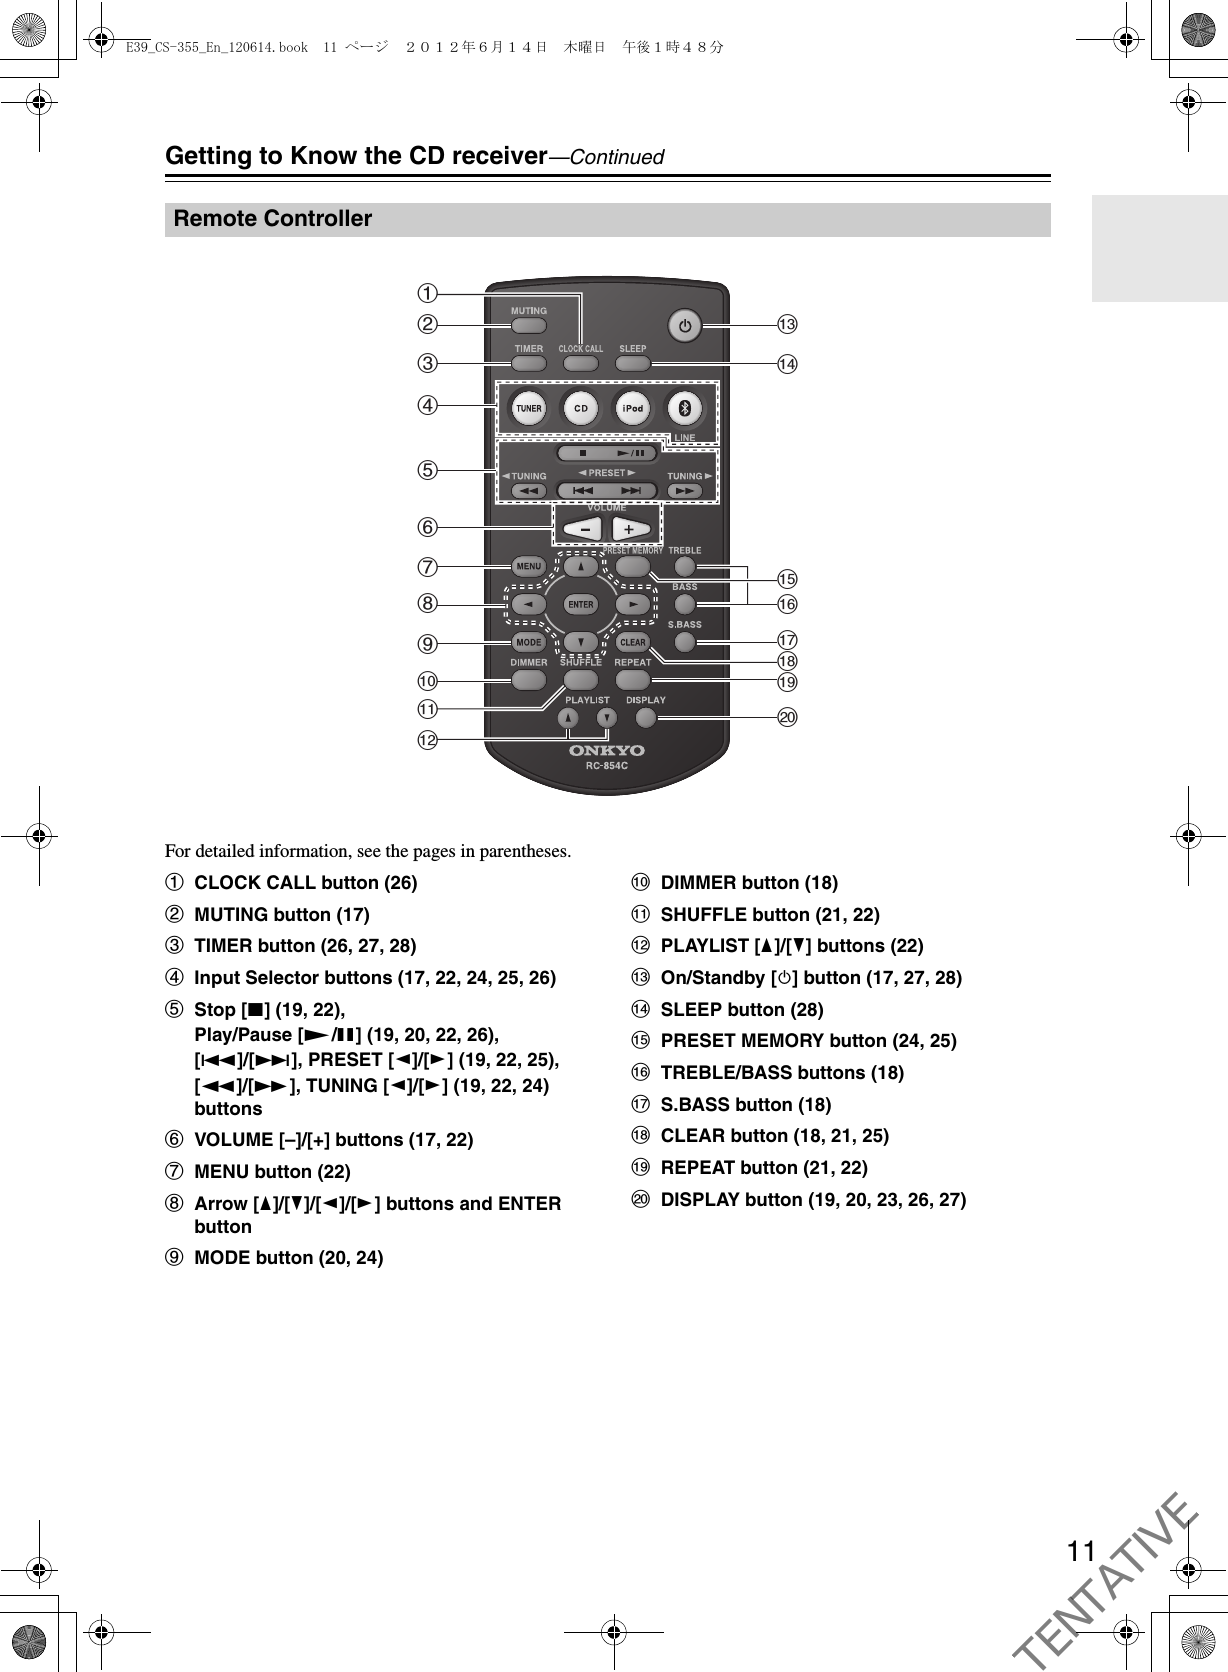 11Getting to Know the CD receiver—ContinuedFor detailed information, see the pages in parentheses.aCLOCK CALL button (26)bMUTING button (17)cTIMER button (26, 27, 28)dInput Selector buttons (17, 22, 24, 25, 26)eStop [2] (19, 22), Play/Pause [1/3] (19, 20, 22, 26), [7]/[6], PRESET [e]/[r] (19, 22, 25), [5]/[4], TUNING [e]/[r] (19, 22, 24) buttonsfVOLUME [–]/[+] buttons (17, 22)gMENU button (22)hArrow [q]/[w]/[e]/[r] buttons and ENTER buttoniMODE button (20, 24)jDIMMER button (18)kSHUFFLE button (21, 22)lPLAYLIST [q]/[w] buttons (22)mOn/Standby [8] button (17, 27, 28)nSLEEP button (28)oPRESET MEMORY button (24, 25)pTREBLE/BASS buttons (18)qS.BASS button (18)rCLEAR button (18, 21, 25)sREPEAT button (21, 22)tDISPLAY button (19, 20, 23, 26, 27)Remote ControlleragijklbcdefhmsnopqrtE39_CS-355_En_120614.book  11 ページ  ２０１２年６月１４日　木曜日　午後１時４８分TENTATIVE